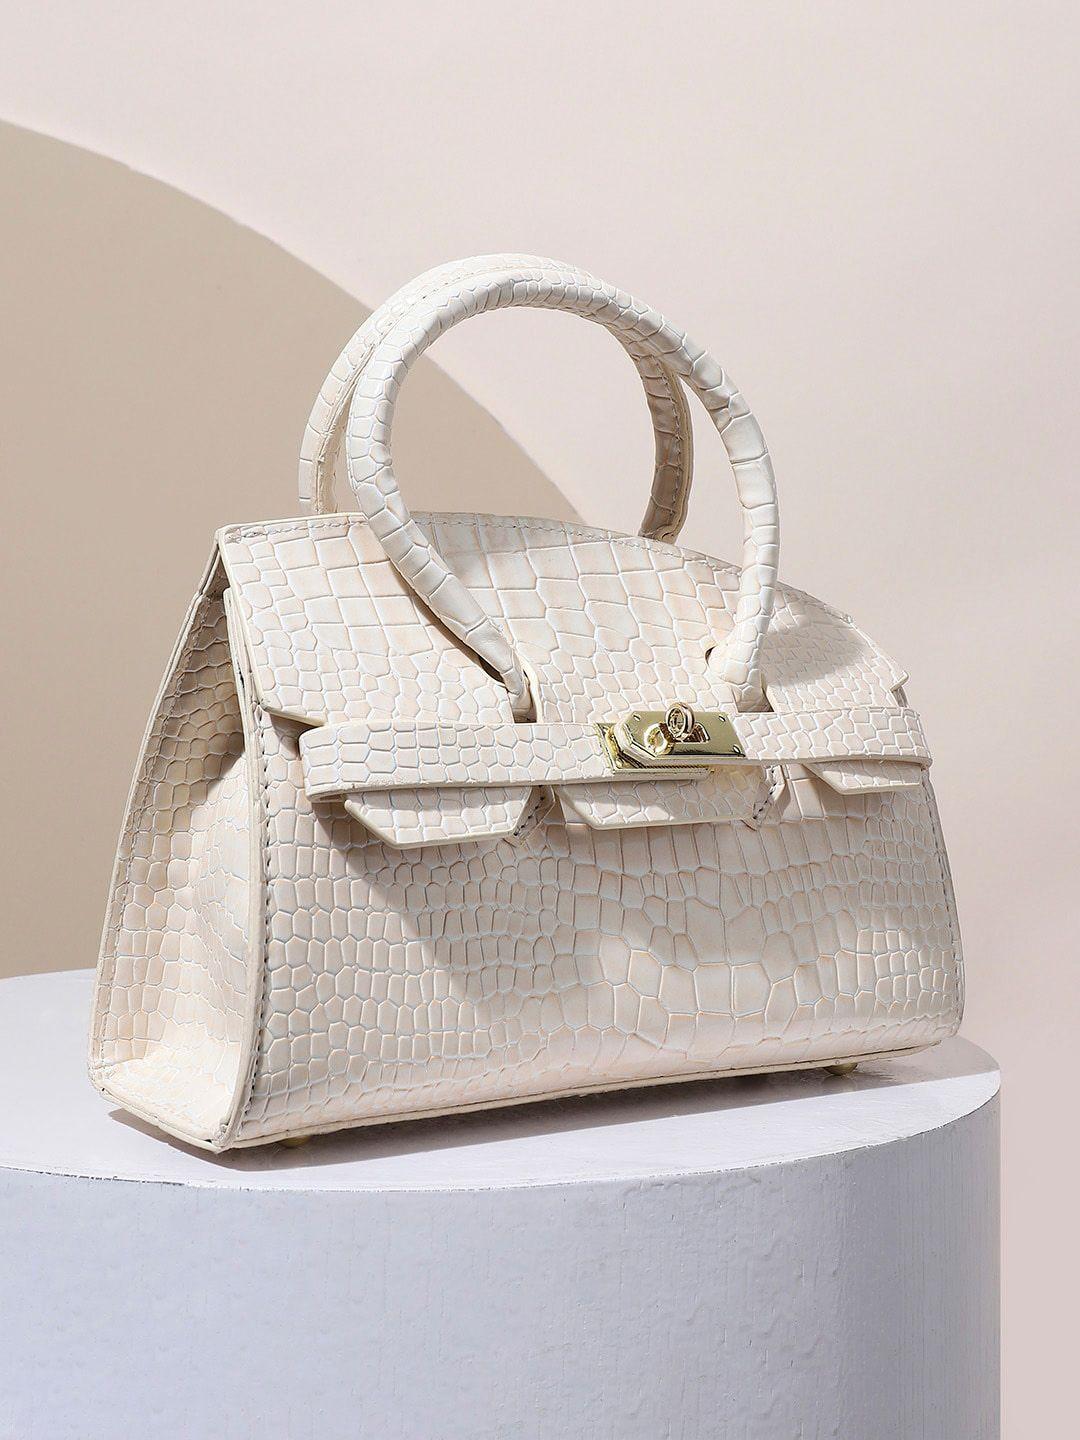 haute sauce by campus sutra textured structured handheld bag